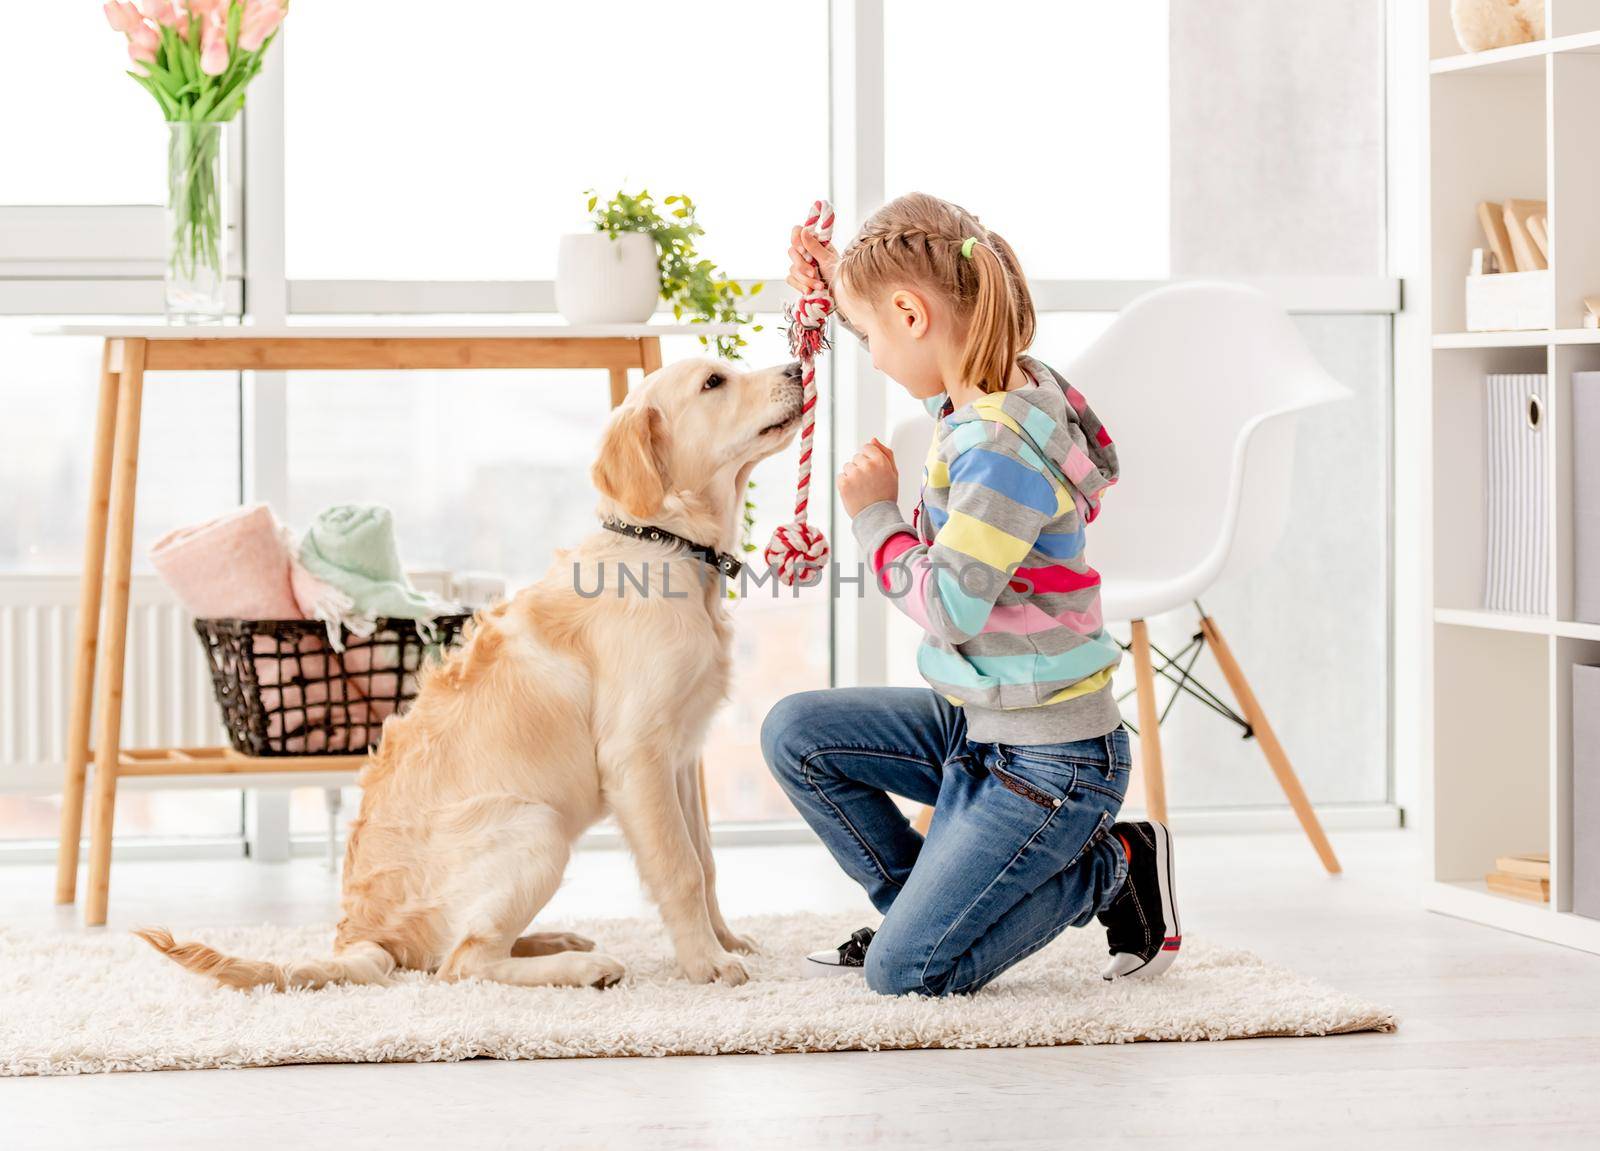 Playful girl with retriever dog in light room